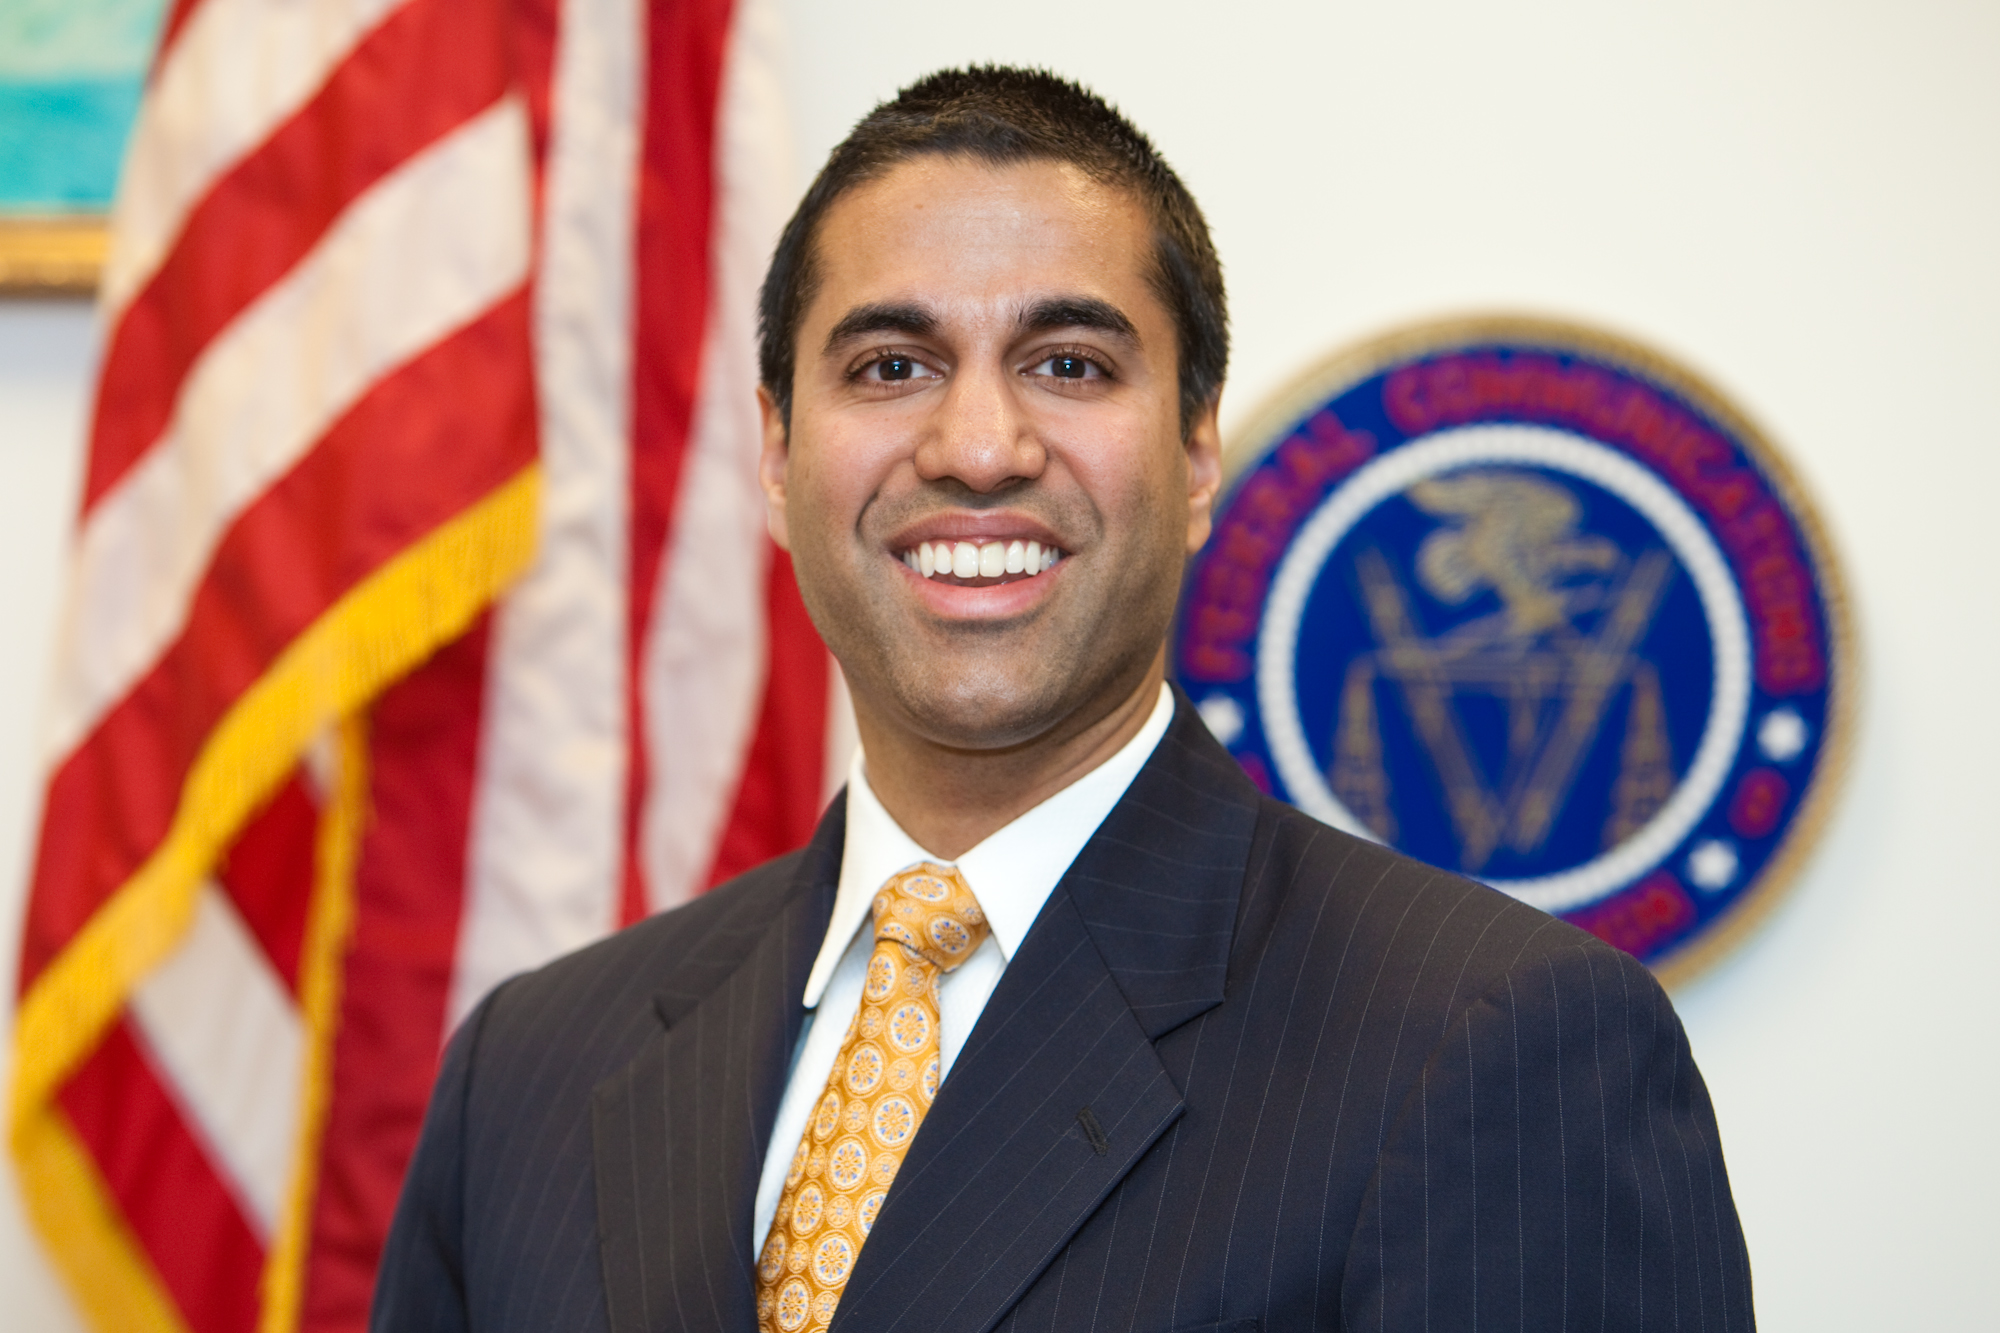 Ajit Pai could become the first Indian American FCC Chairman